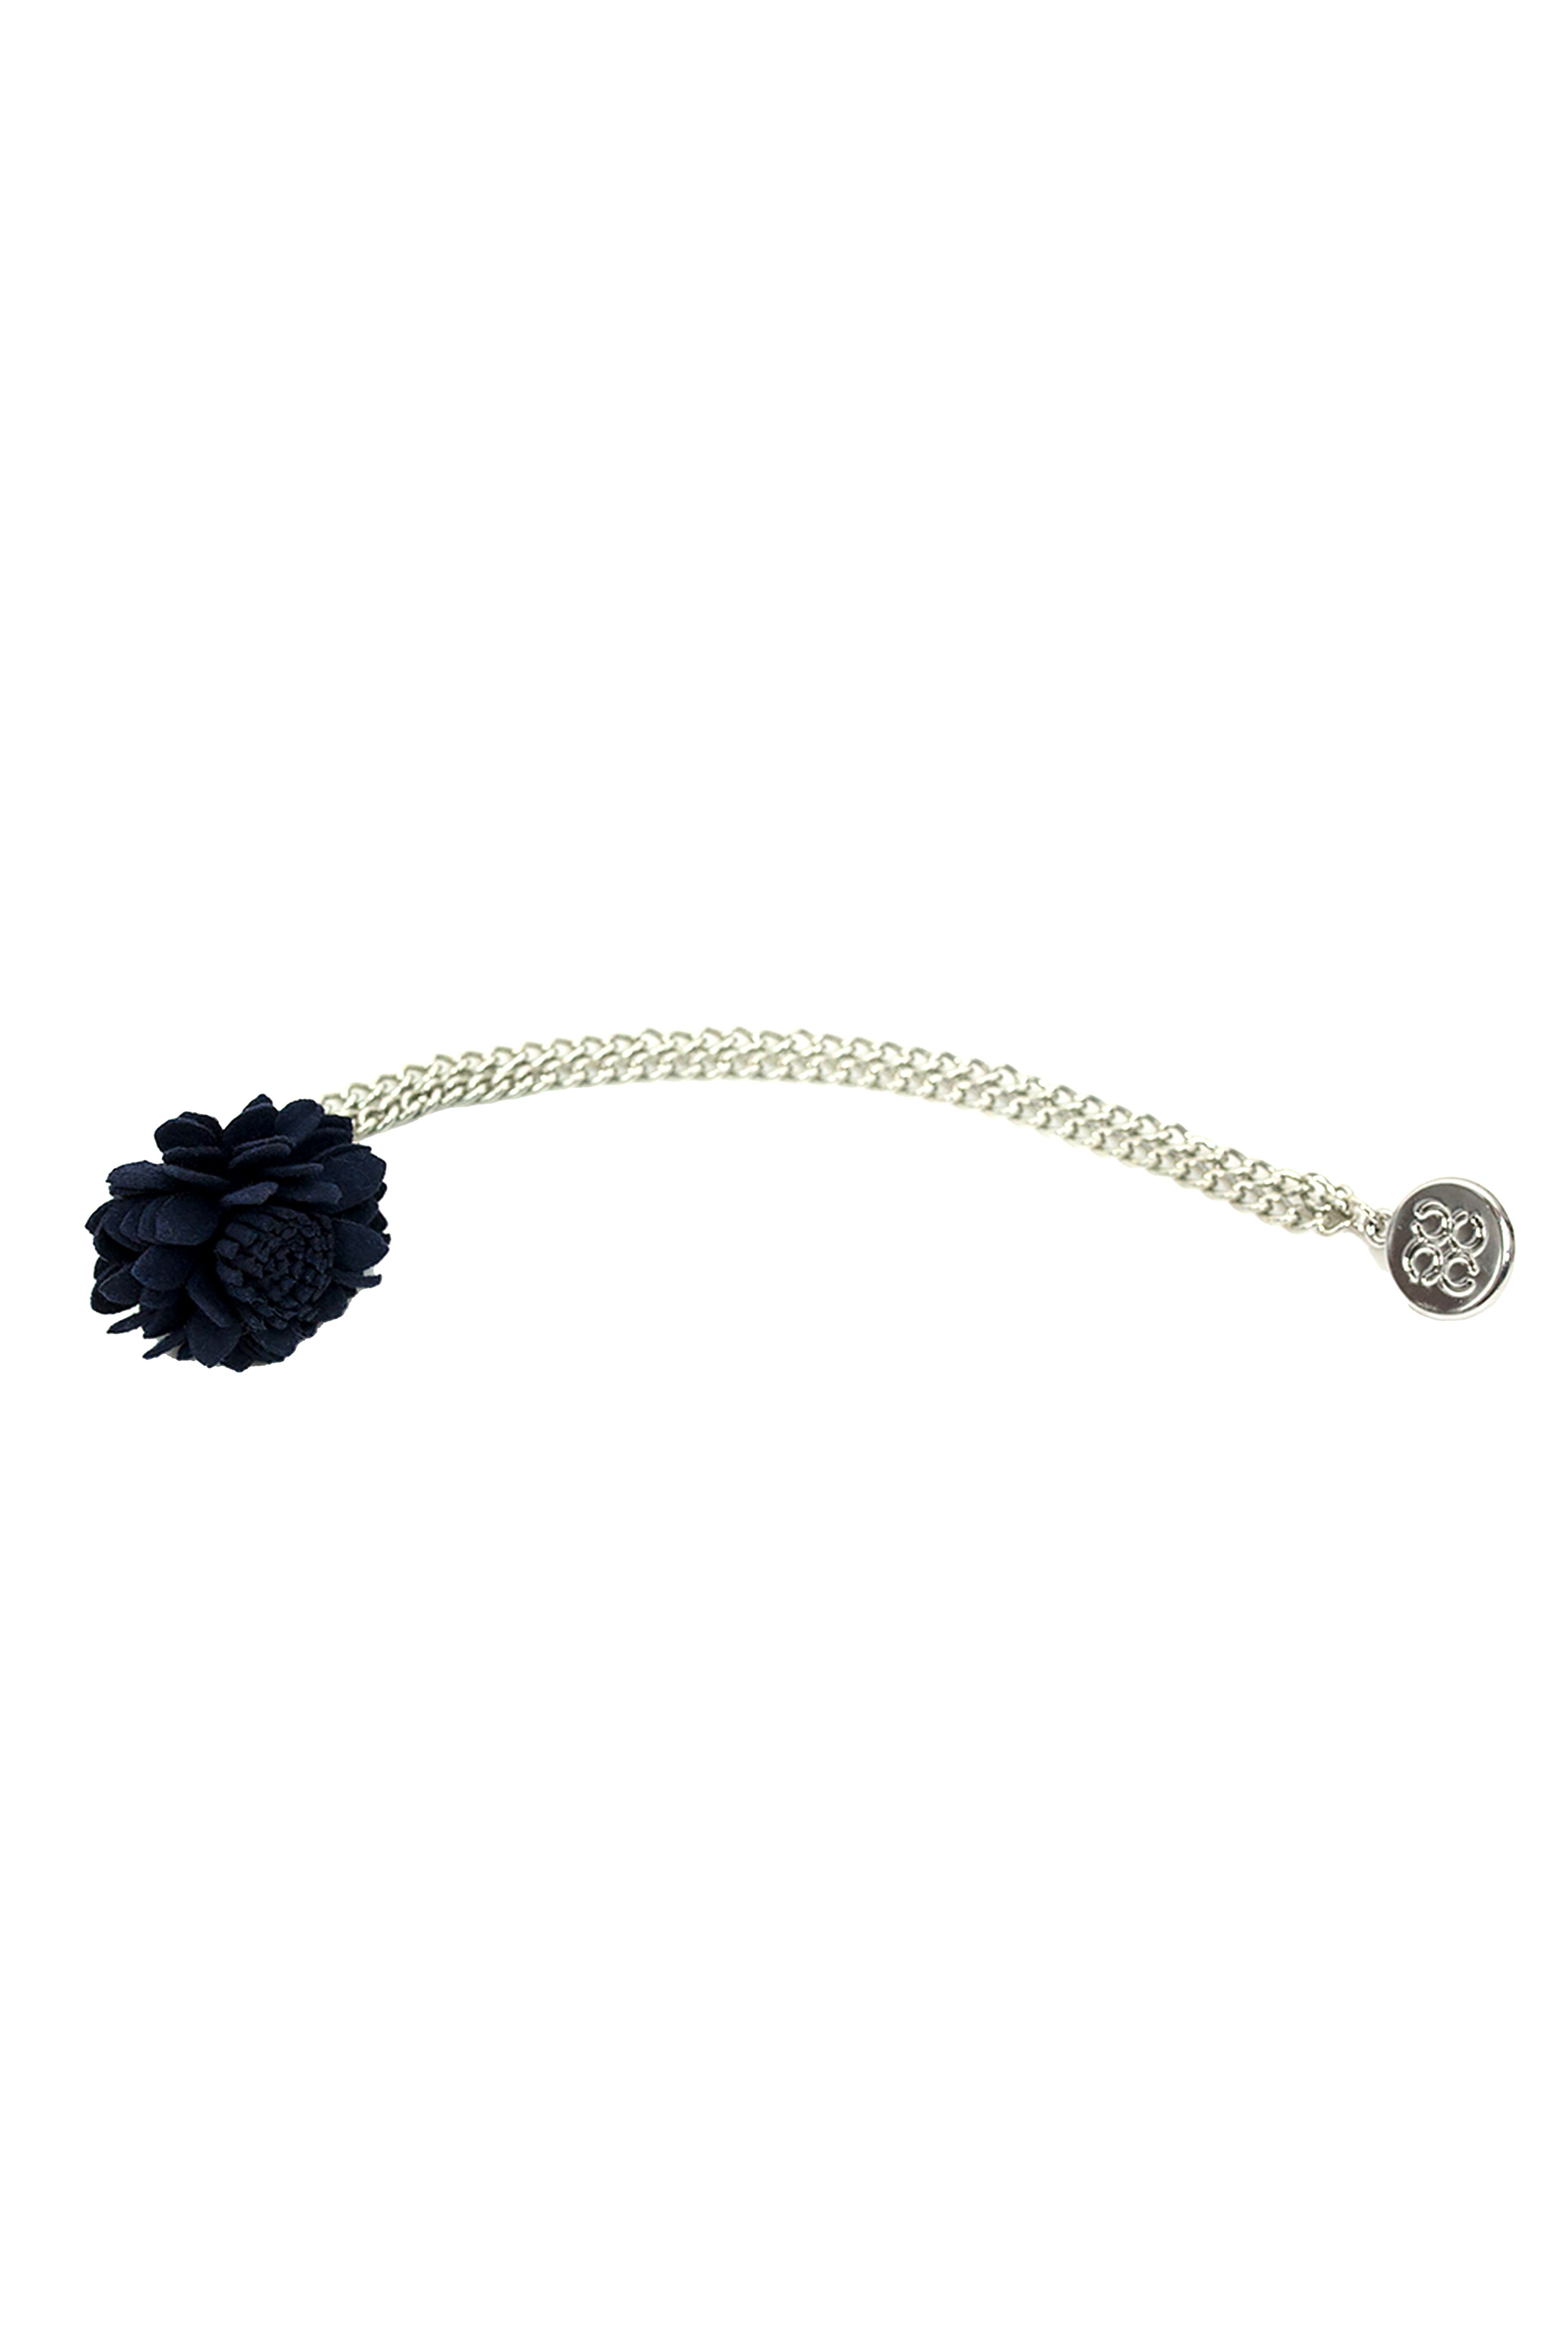 Unisex Flower Chain Brooch Suit Accessory - Navy Blue